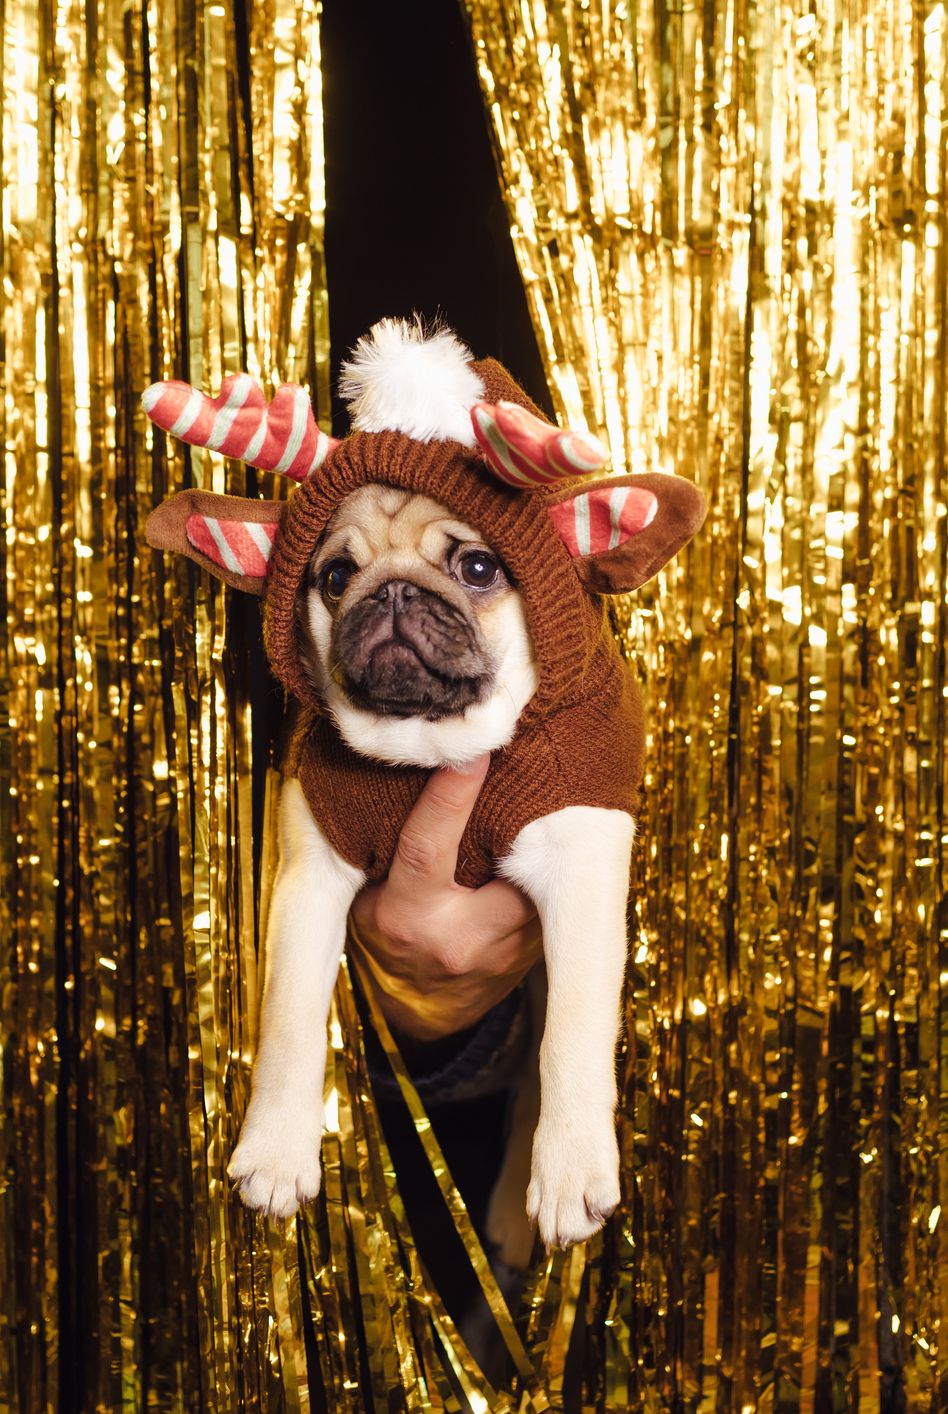 pug dressed as a christmas deer in new year's decor golden curtain on the background